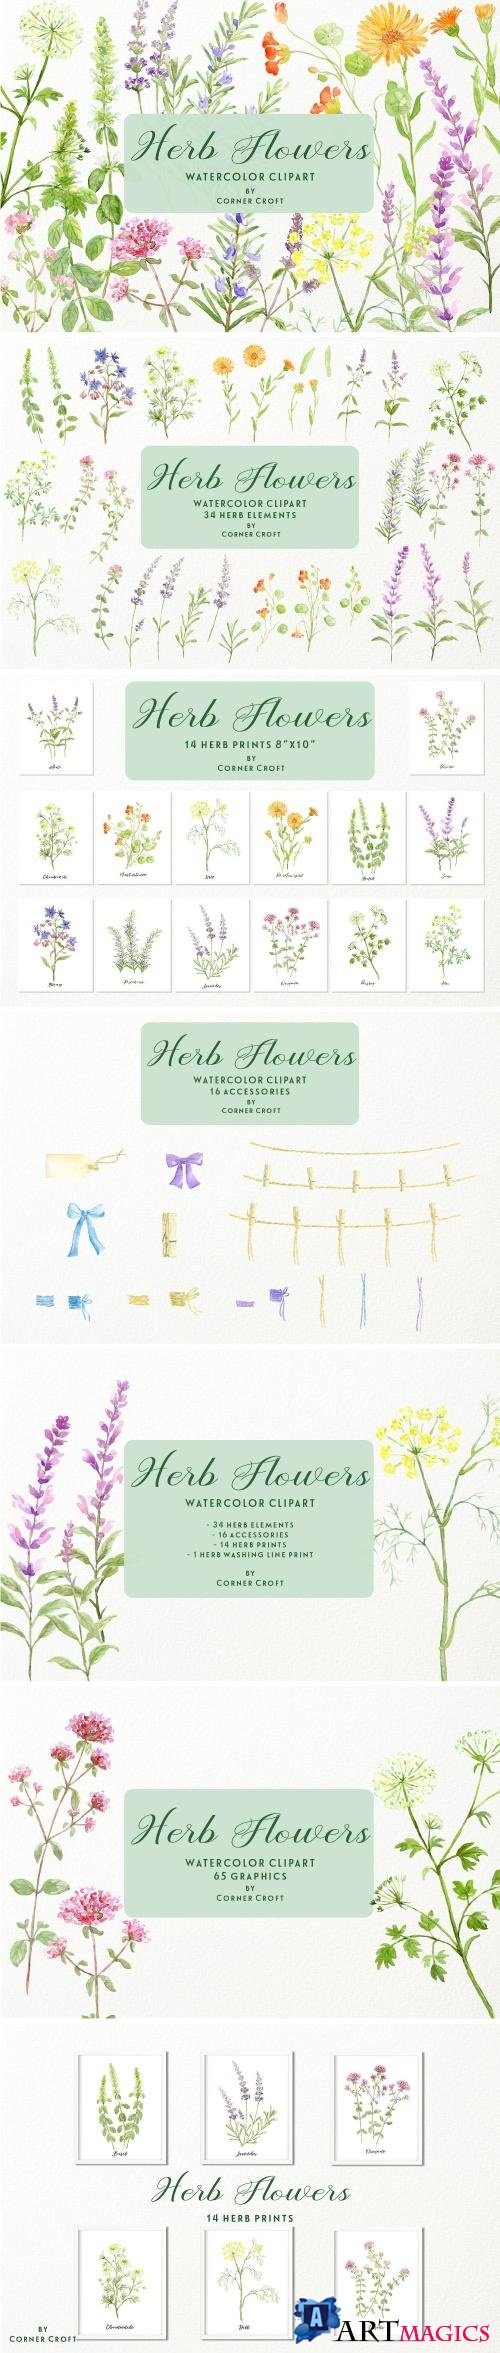 Watercolor Herb Flower Clipart - 2802463